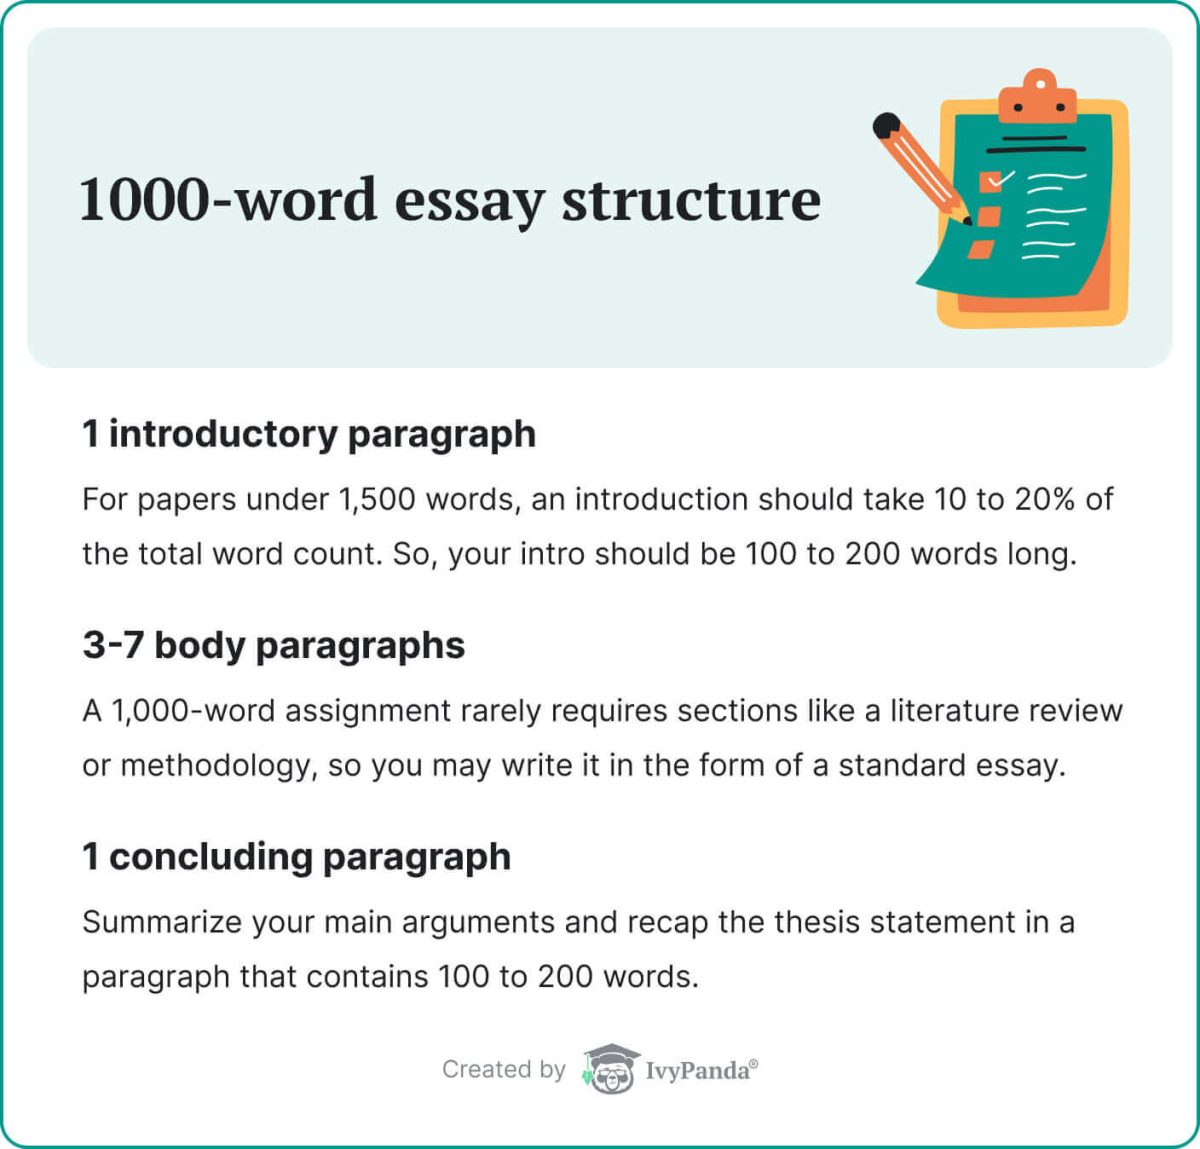 The picture lists the components of a 1000-word essay.